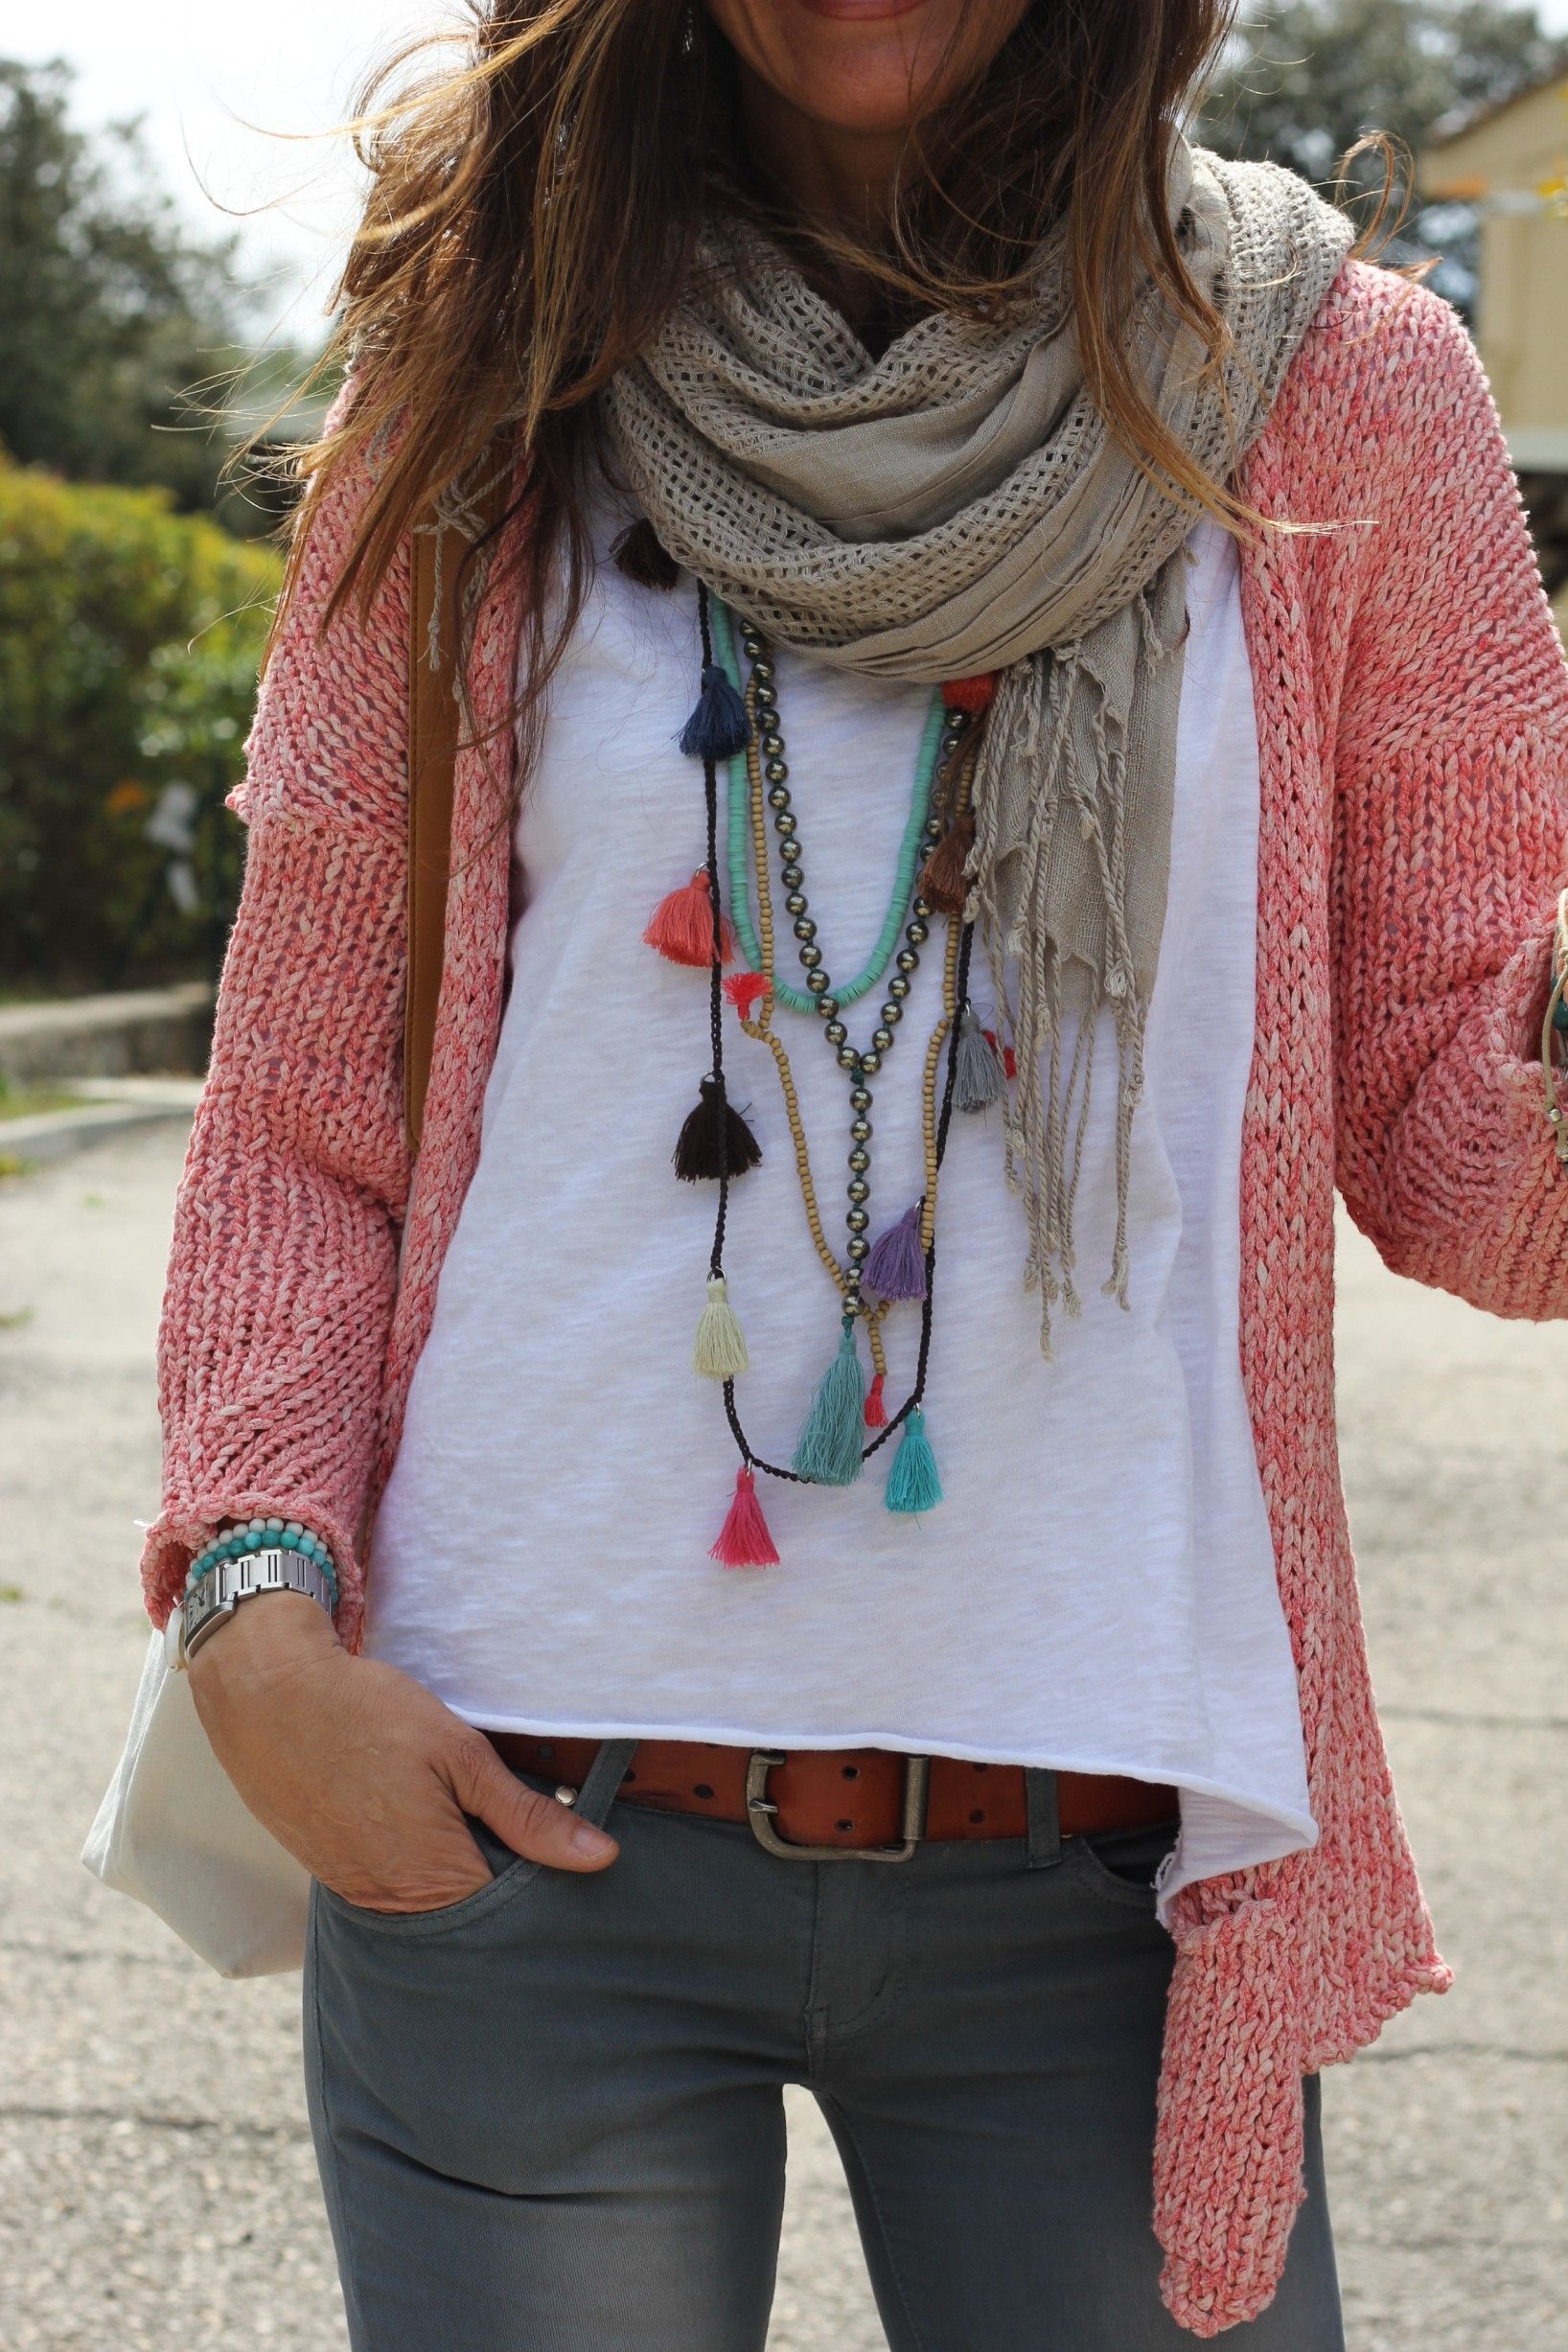 I love the long necklace with the scarf! It just adds a little something to the plain white shirt